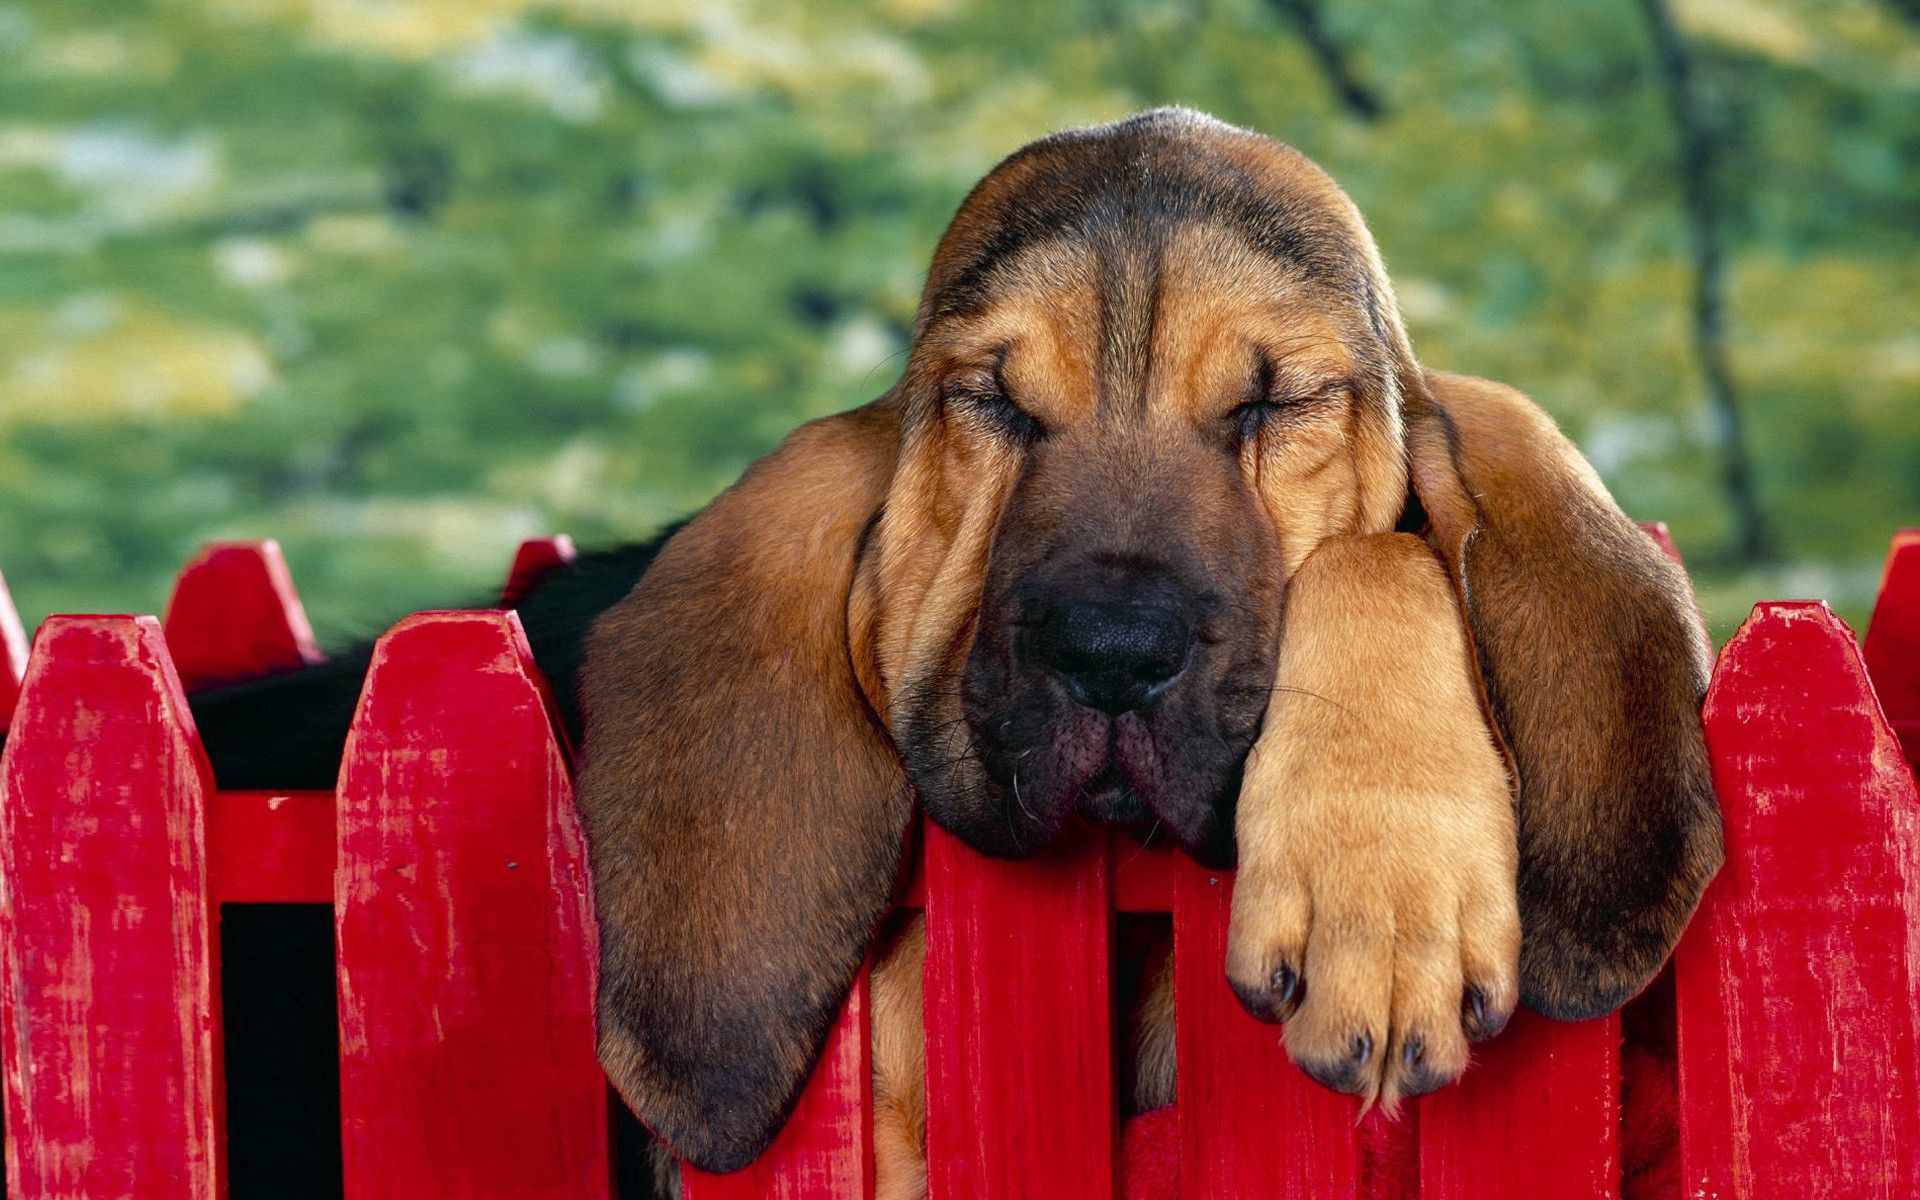 animals, rest, fence, puppy, sleep, relax, eared